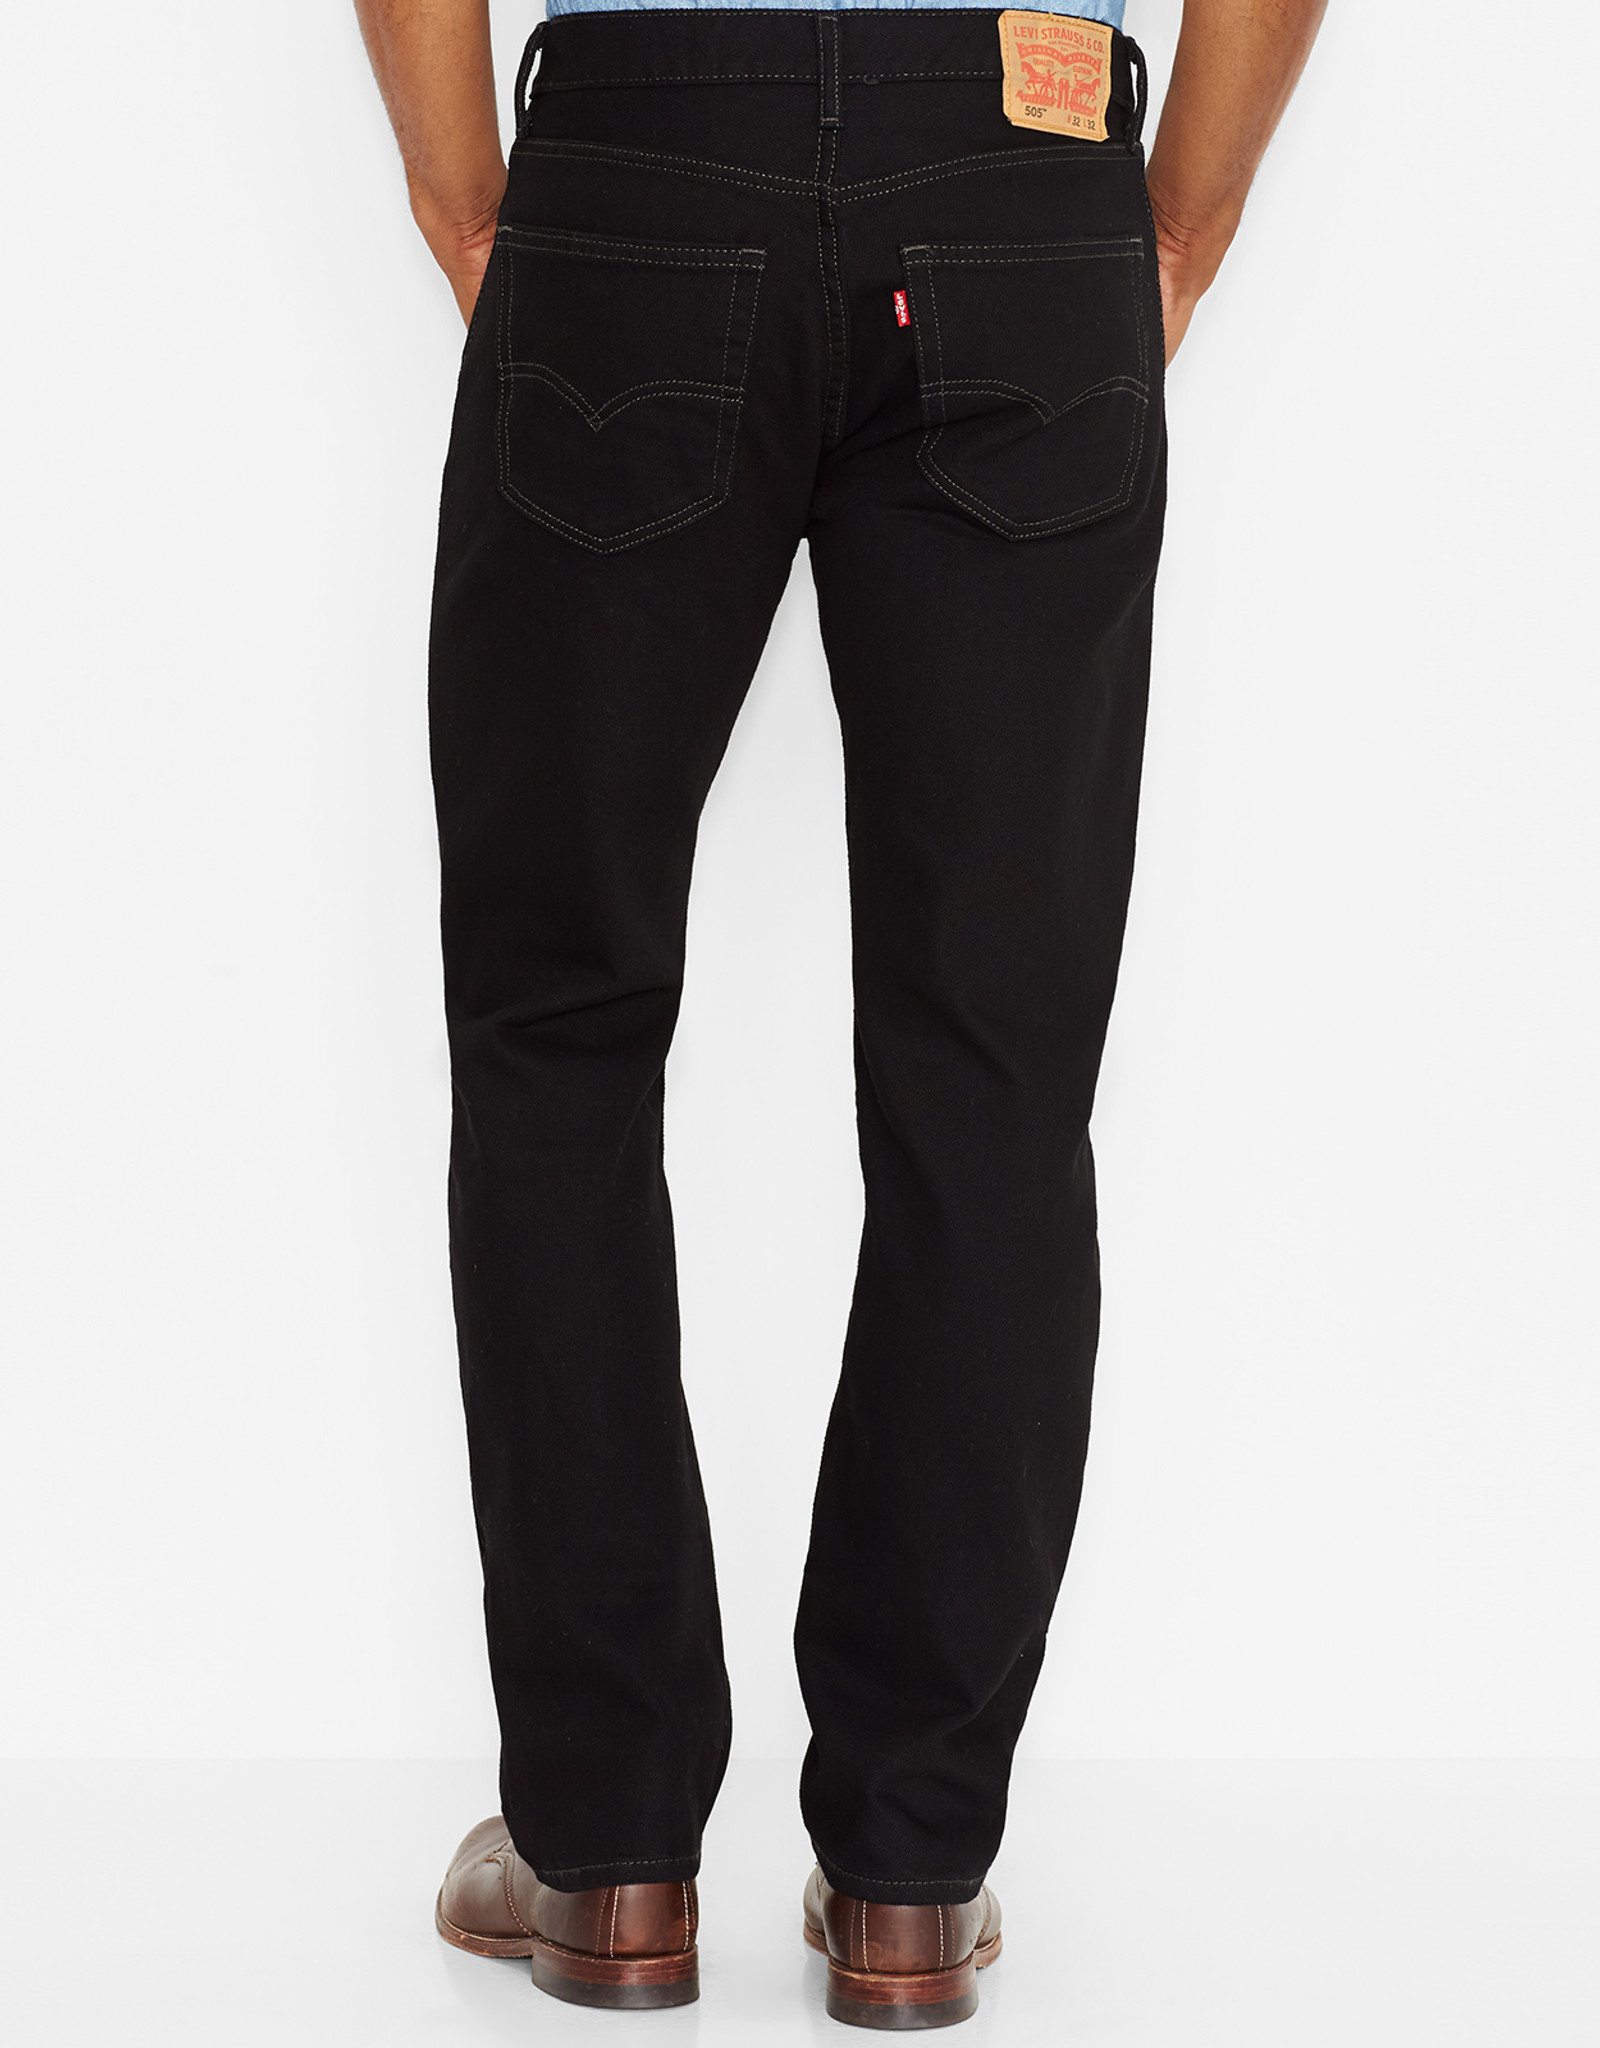 Levi's - The Jean Fits Guys Should be Rocking | Just Jeans™ Online